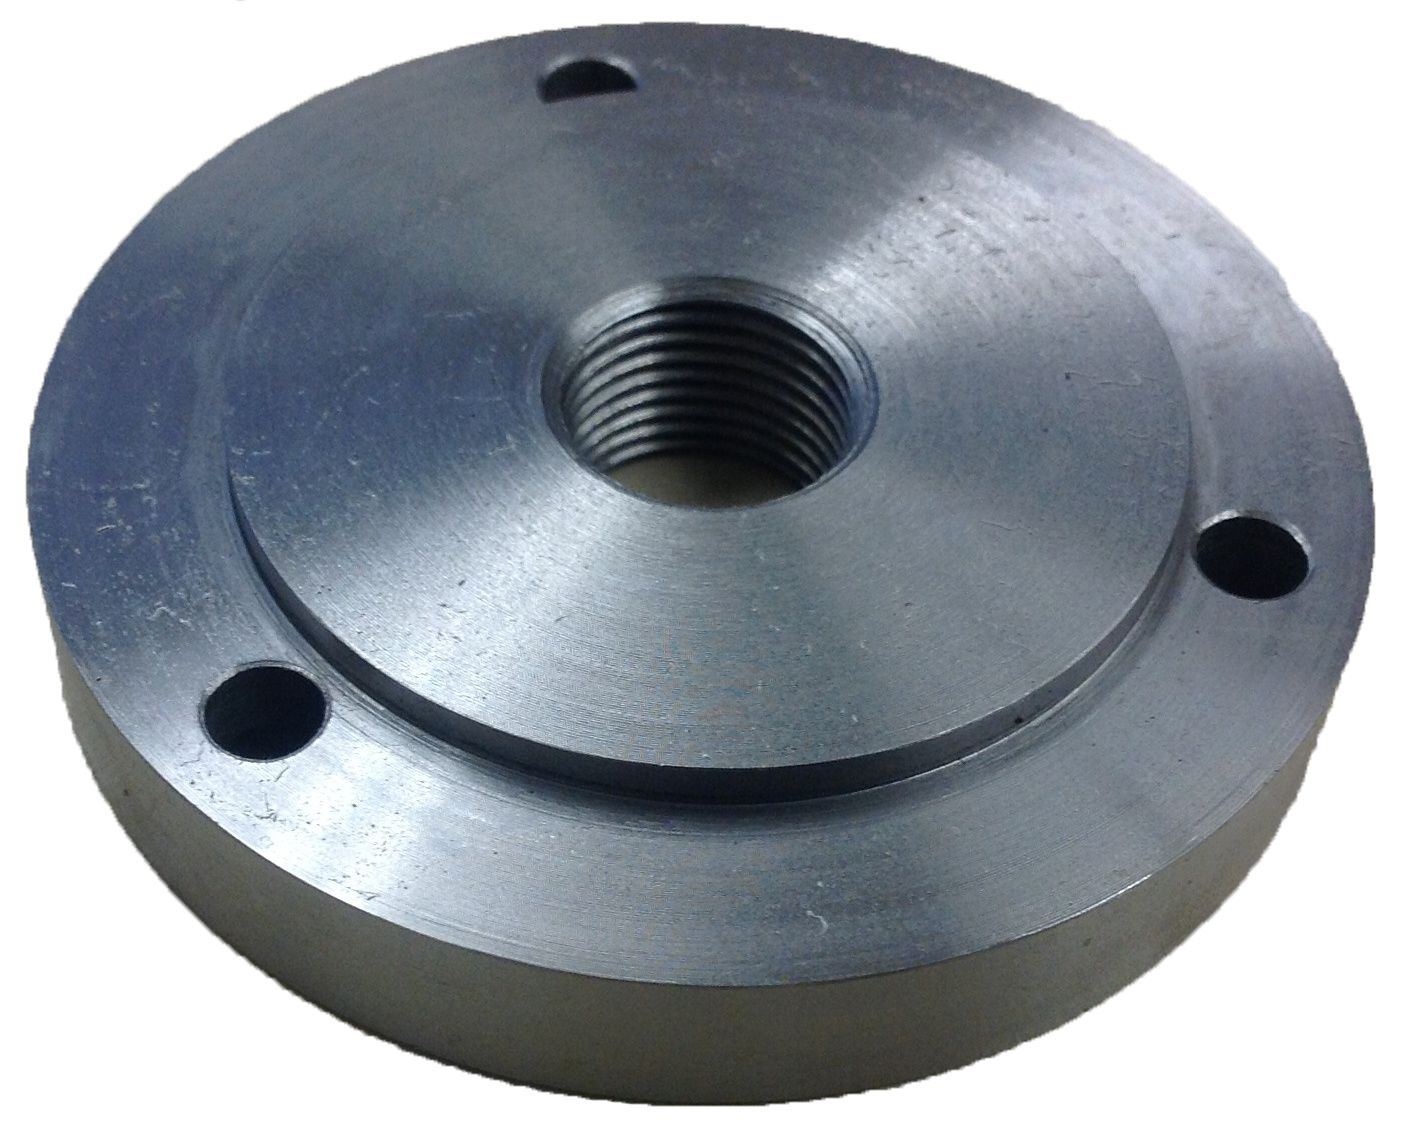 4" 1"-8 BACKPLATE FOR 3 JAW CHUCKS (3900-3210)